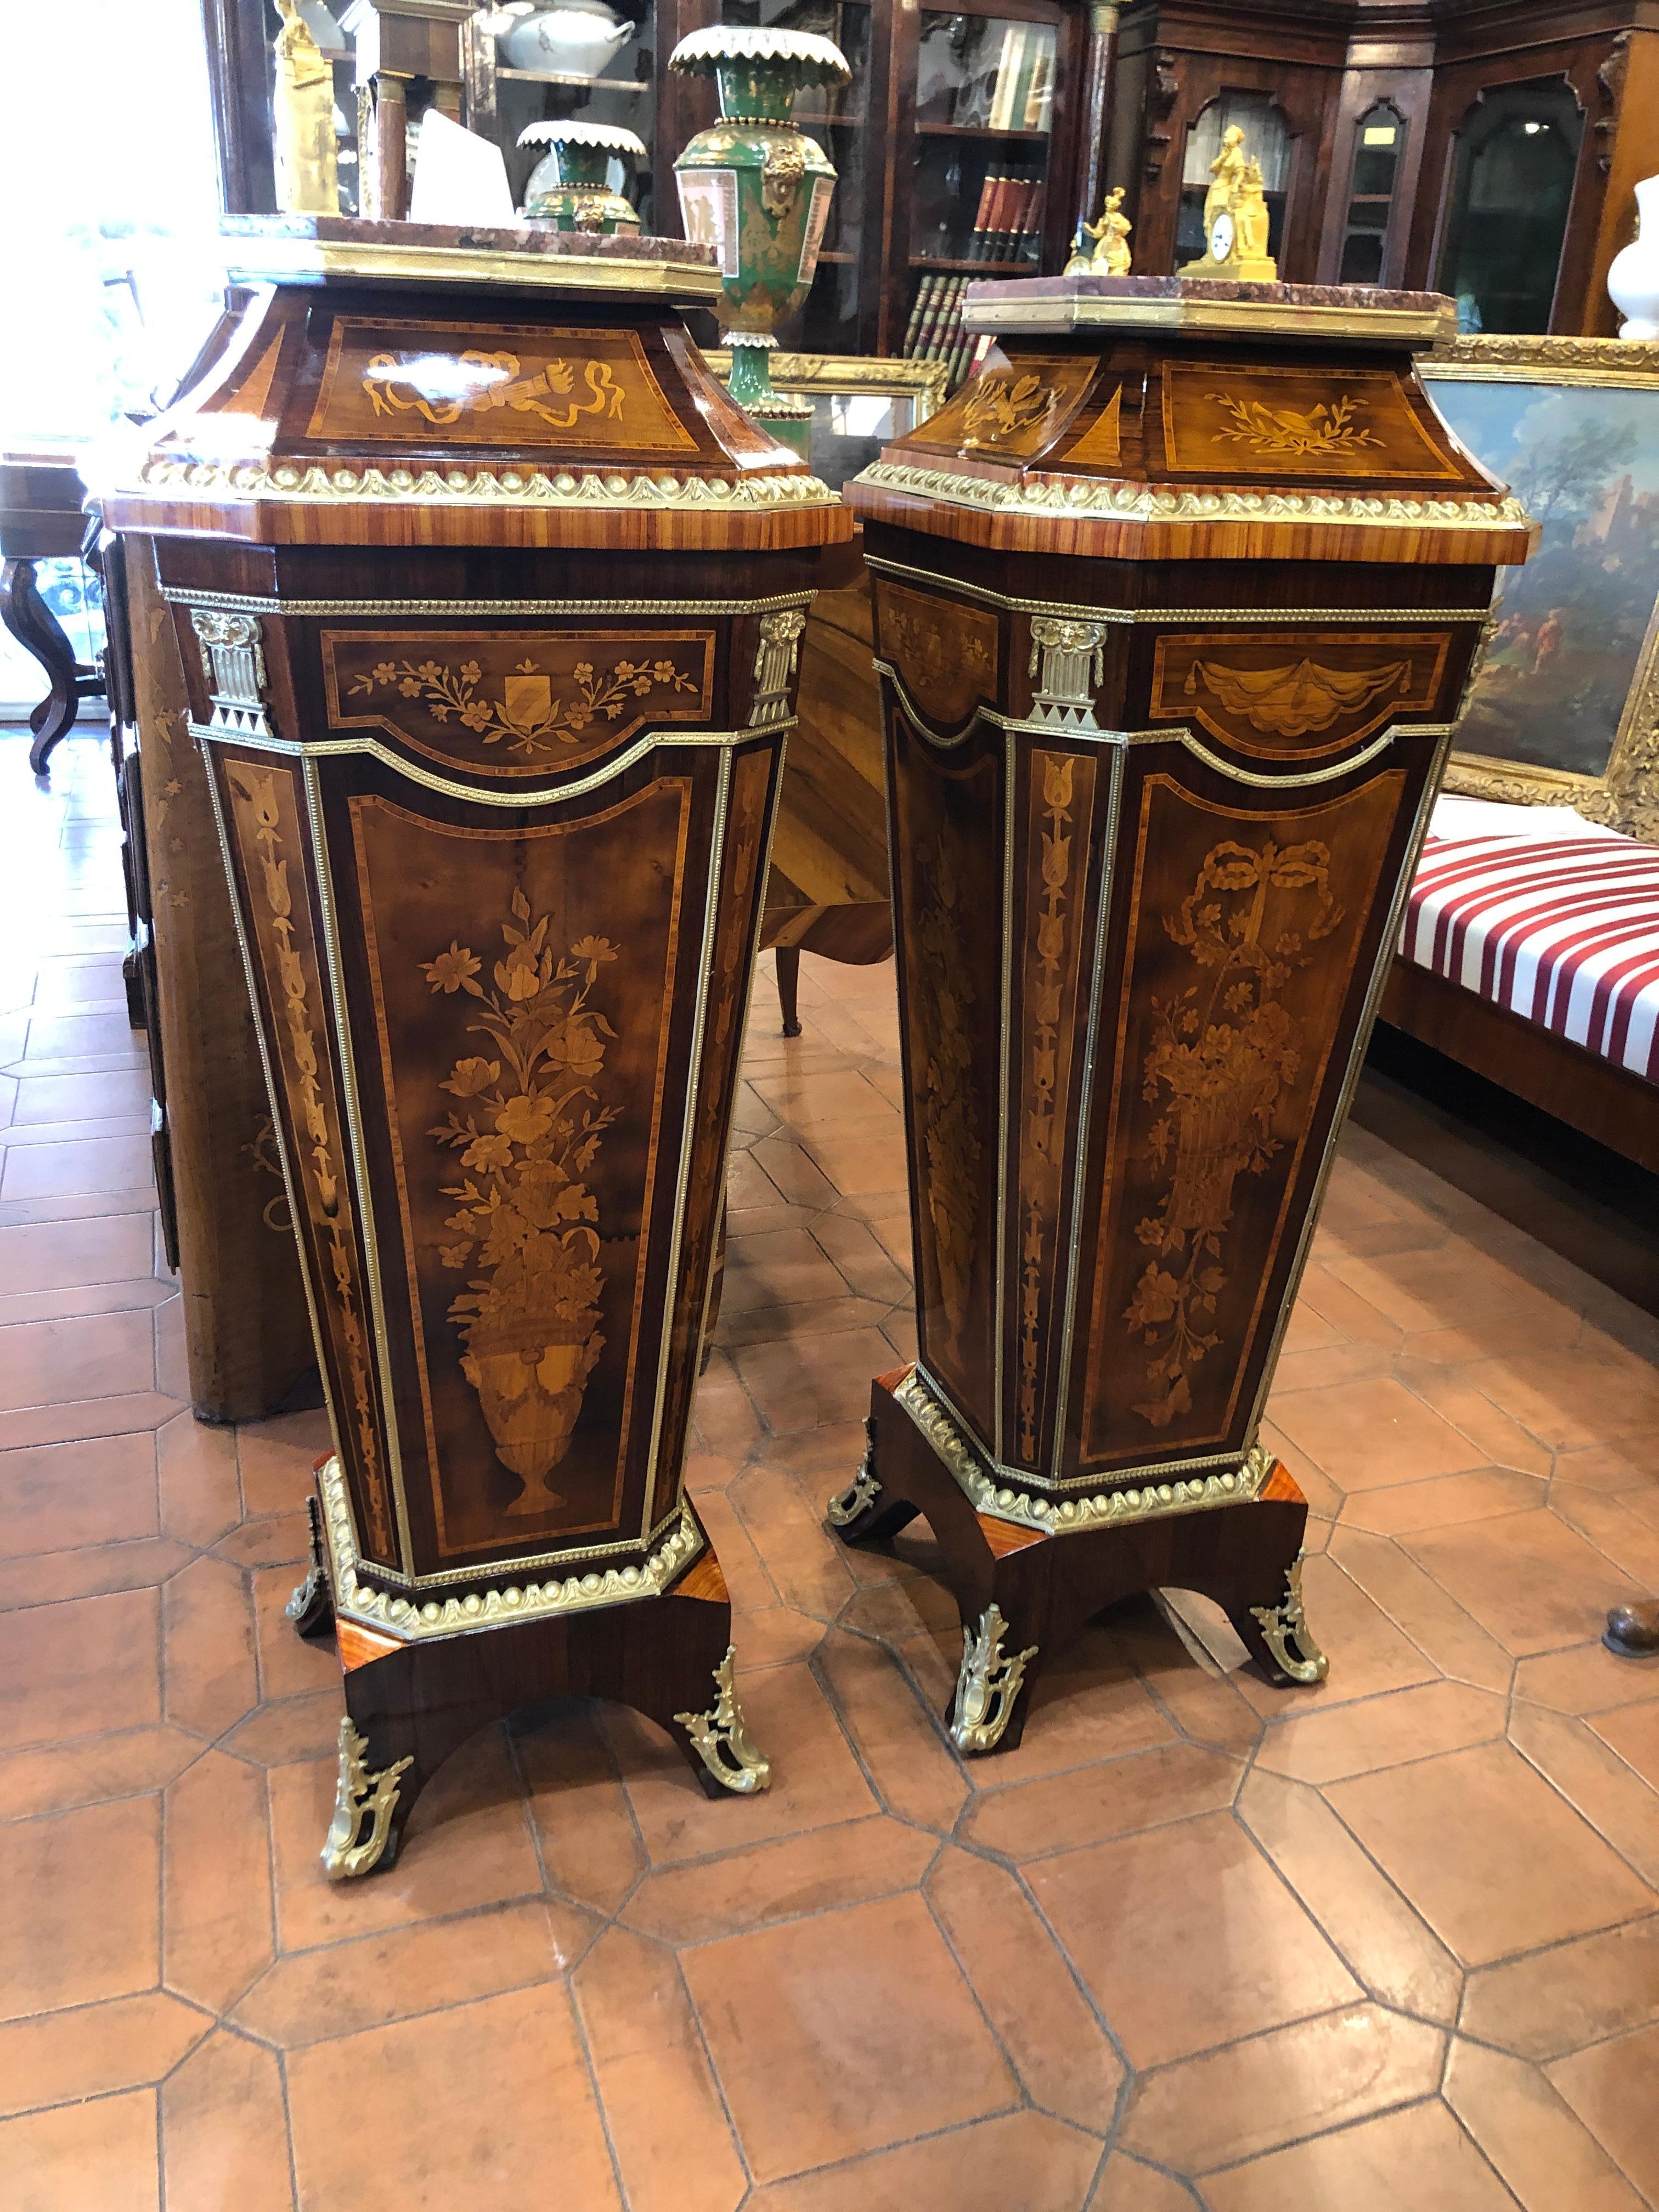  Fantastic Pair of mahogany and rosewood columns, inlaid in fruitwood and with gilt bronze applications, top in red marble, from France, Napoleon III period, in Louis XV style, circa 1880. NOW RESTORED! 
Now you can see the difference between the